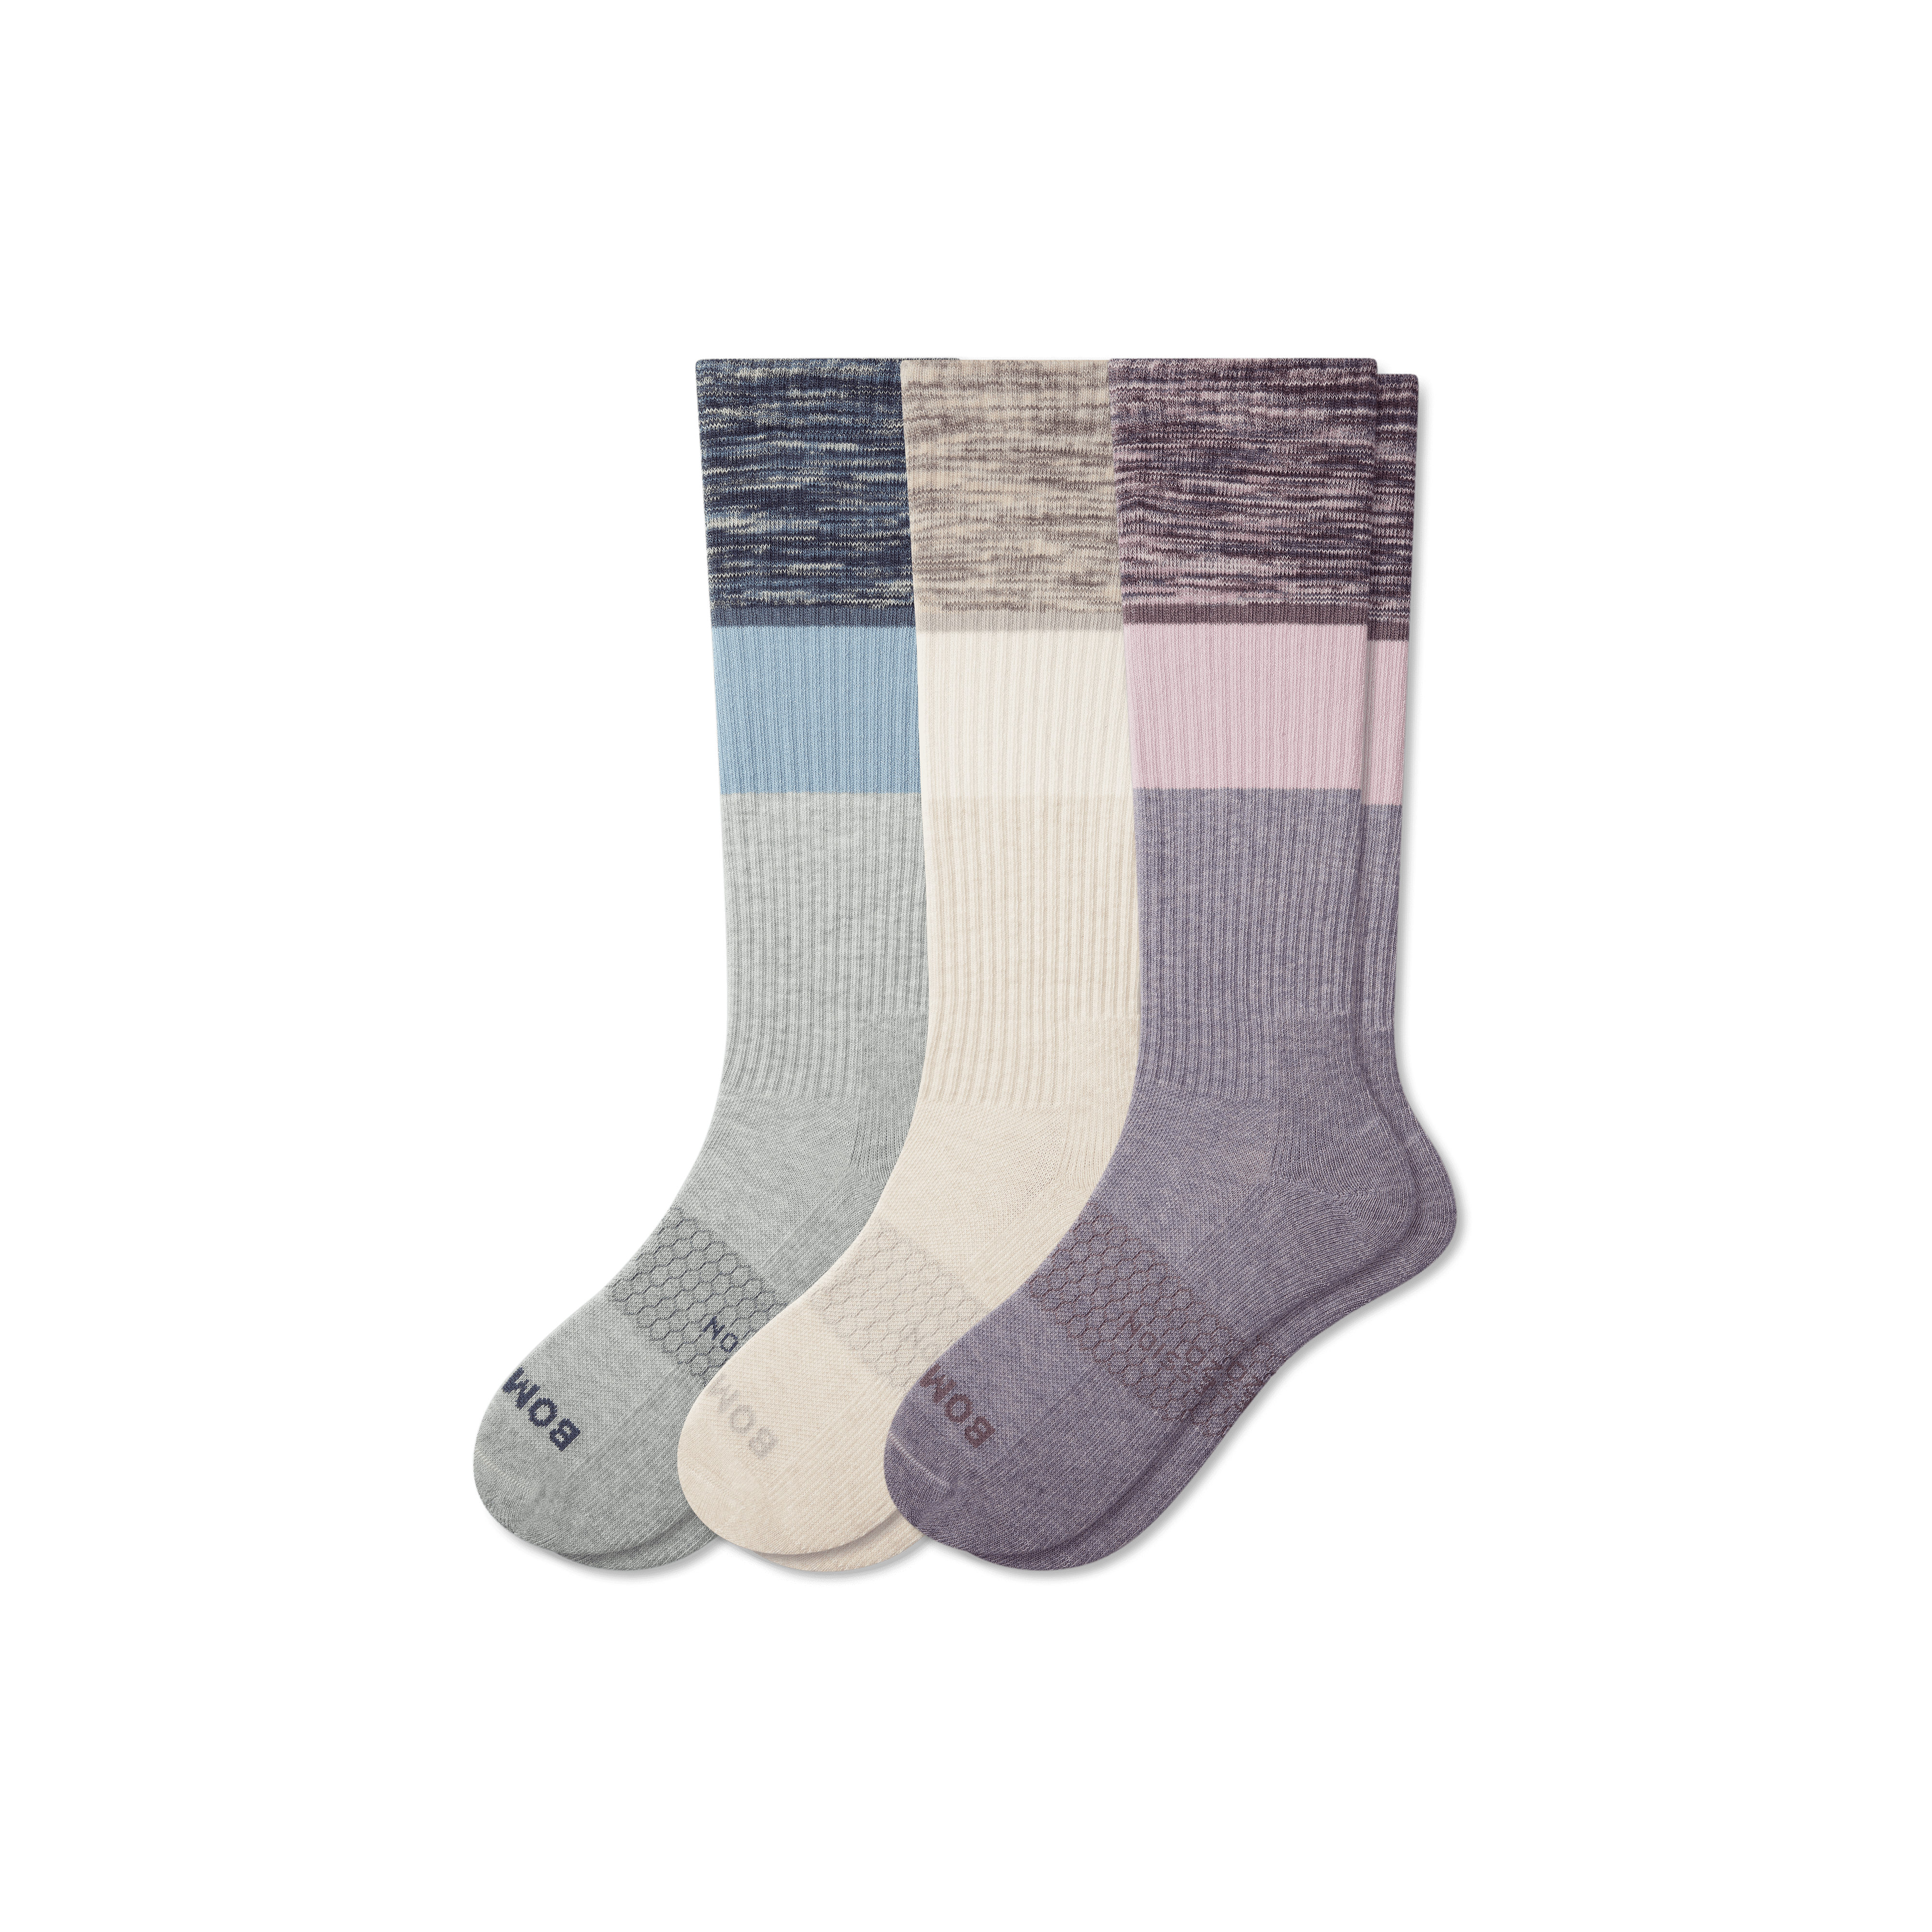 Bombas Everyday Compression Sock 3-pack (15-20mmhg) In Lavender Ivory Mix